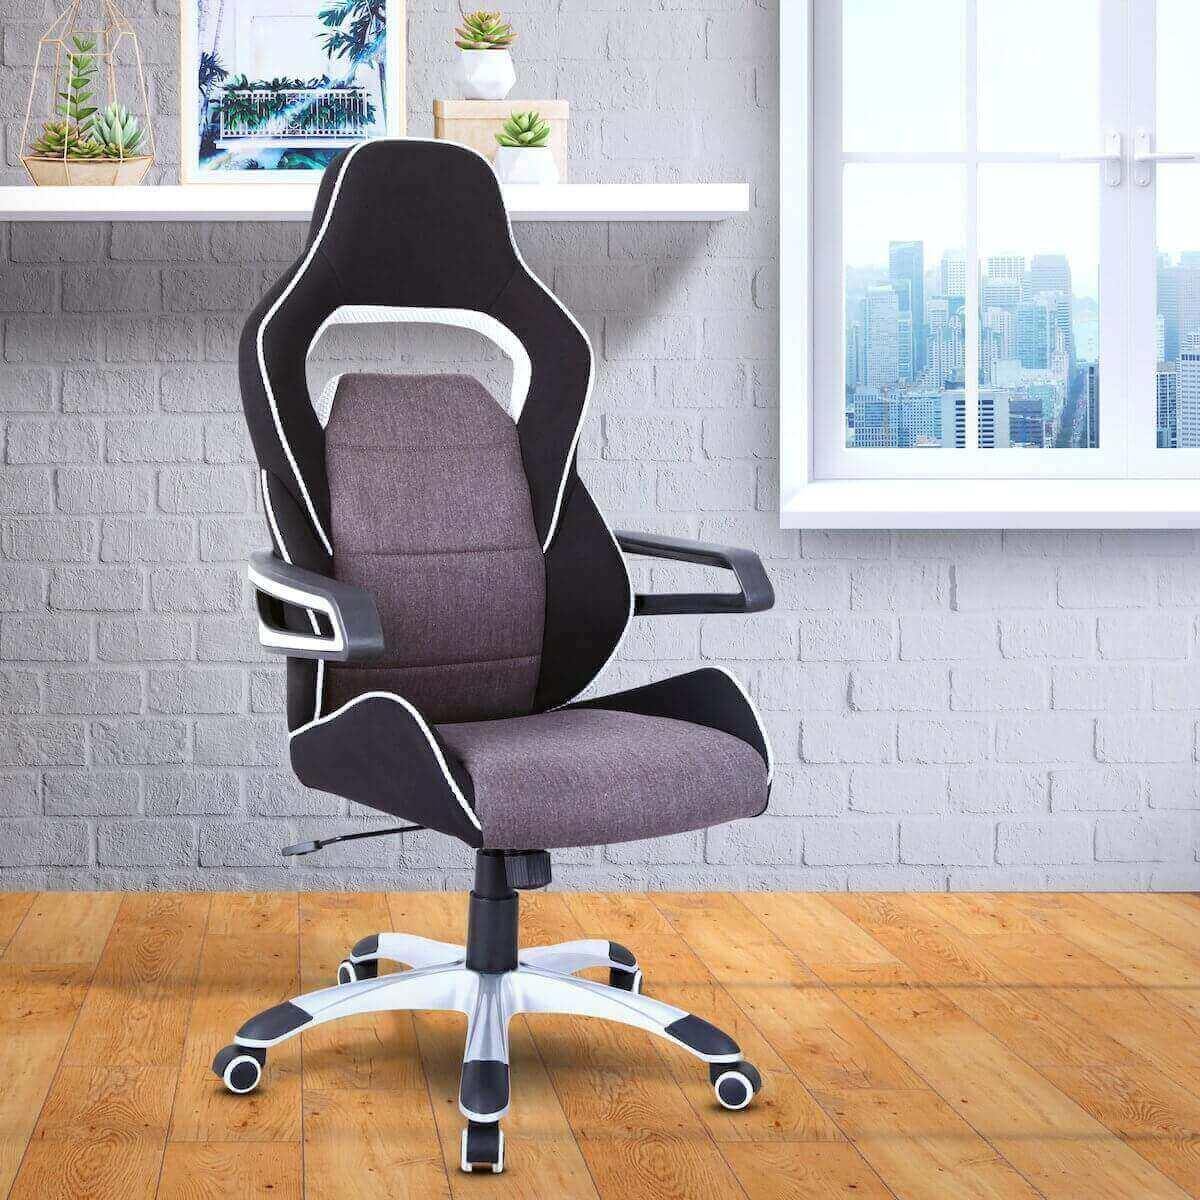 Techni Mobili Gray/Black Ergonomic Upholstered Racing Style Home & Office Chair RTA-2017-GRY in Office